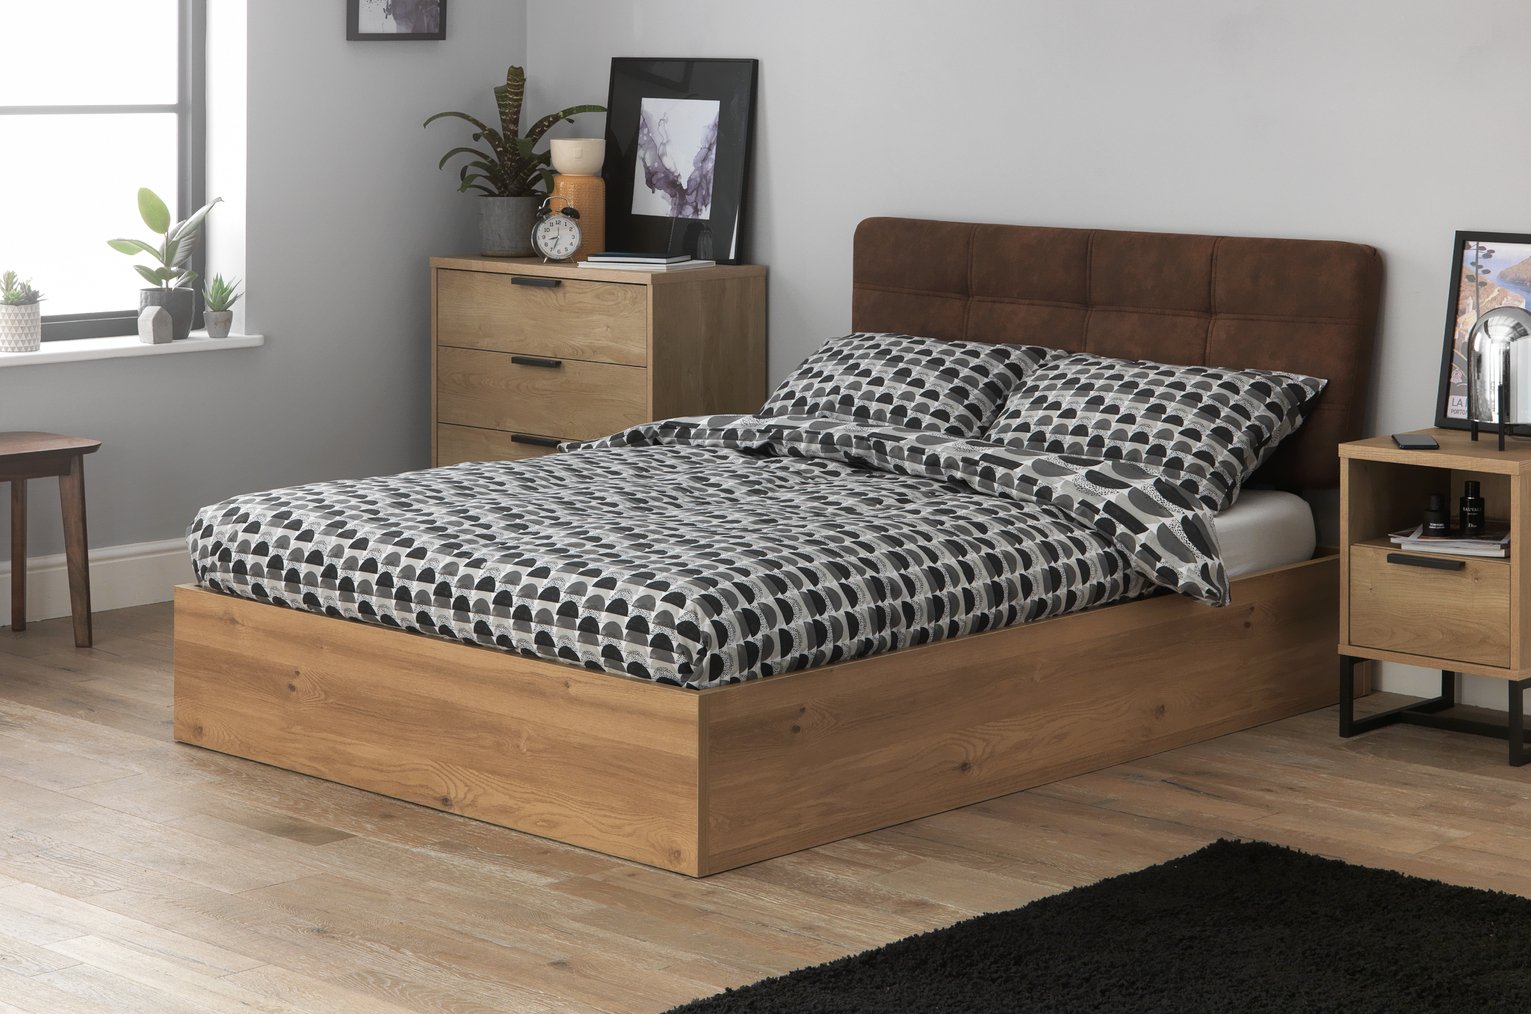 Argos Home Tribeca Ottoman Double Bed Frame Review